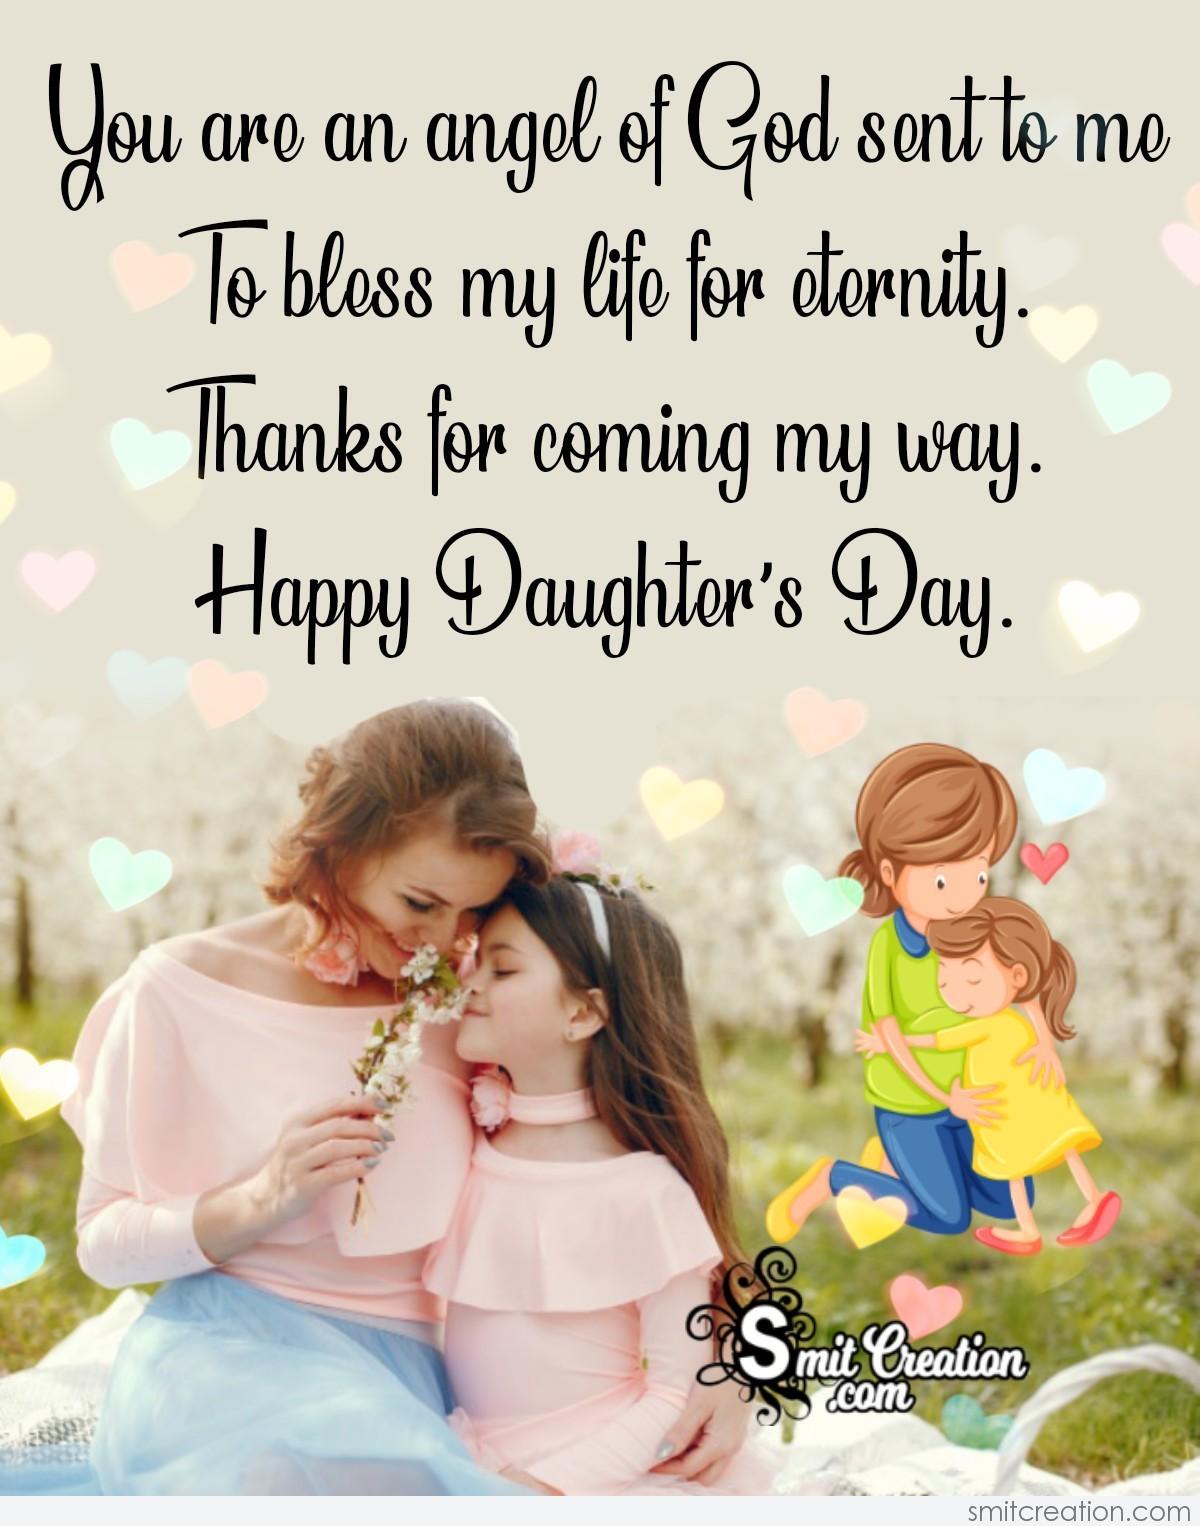 Daughters Day Wishes And Image - SmitCreation.com